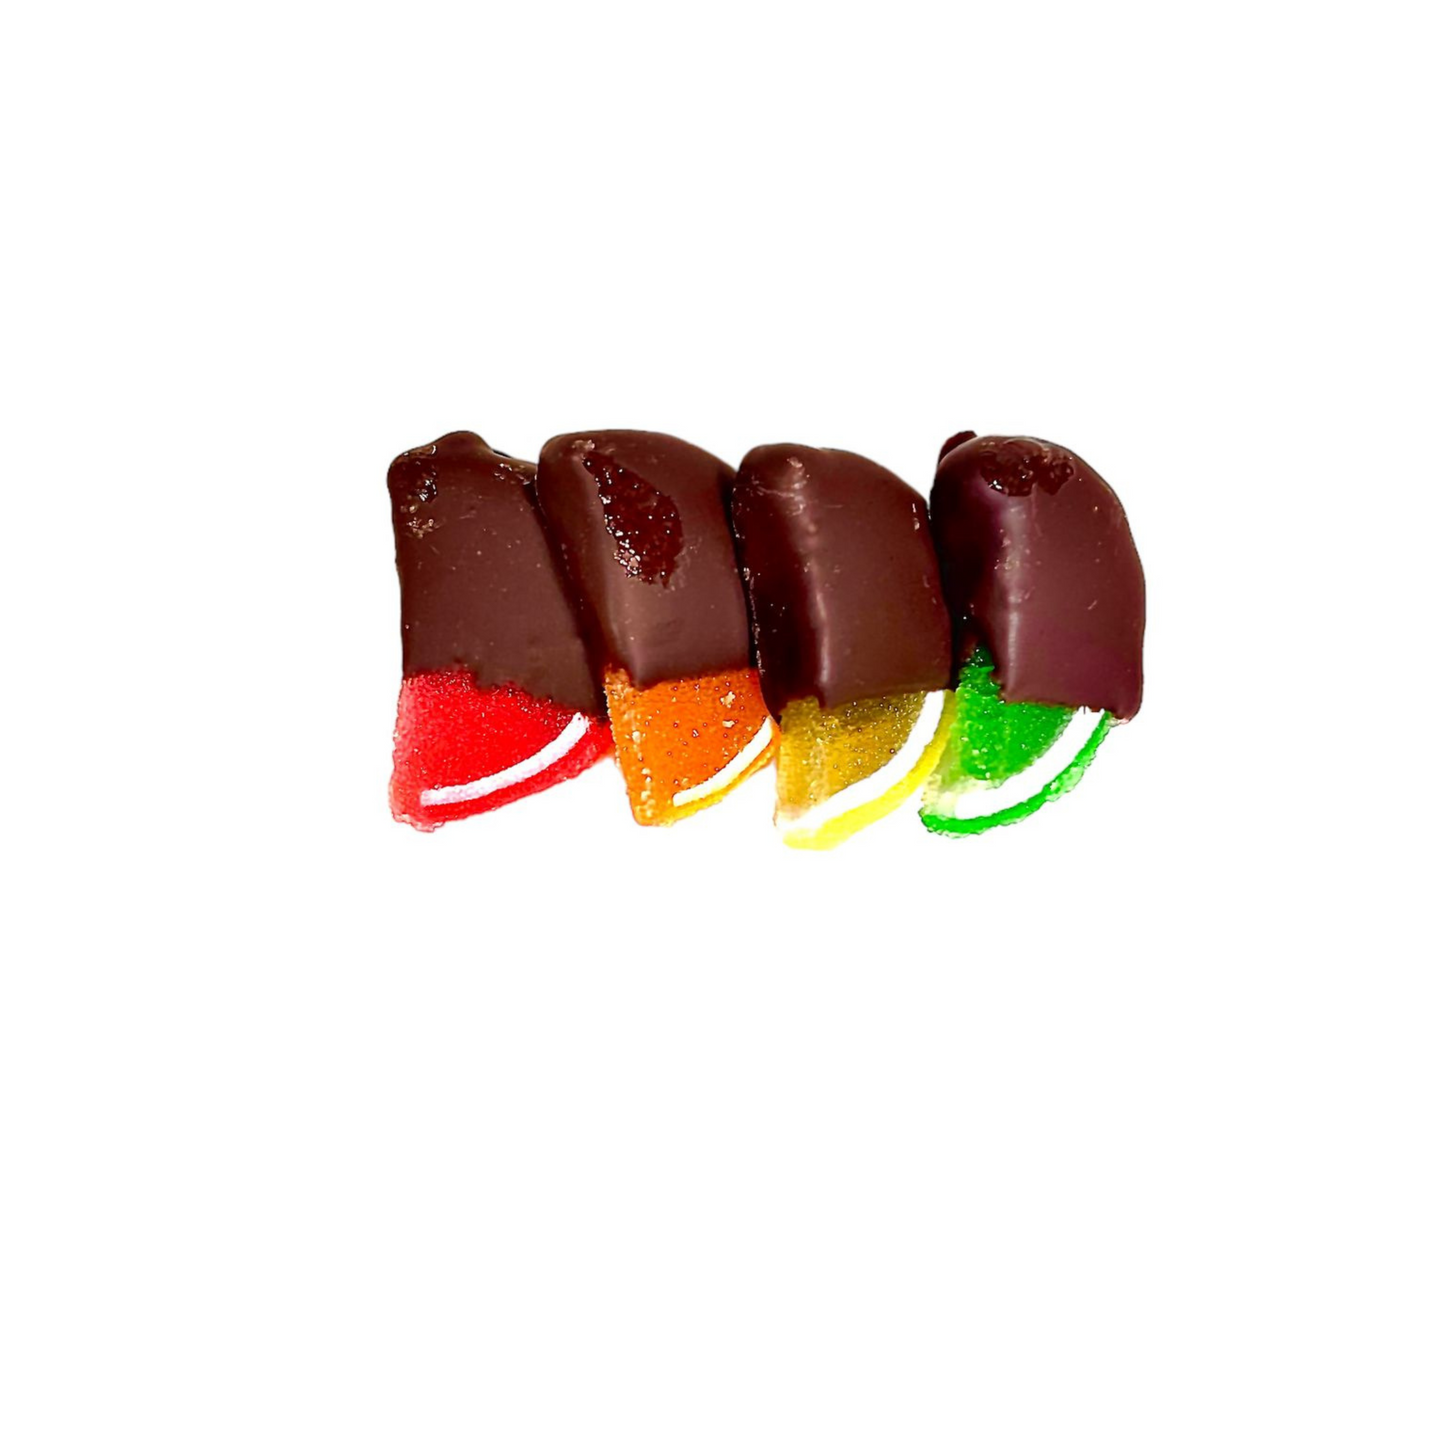 Chocolate Covered Fruit Flavored Slices | Kosher for Passover